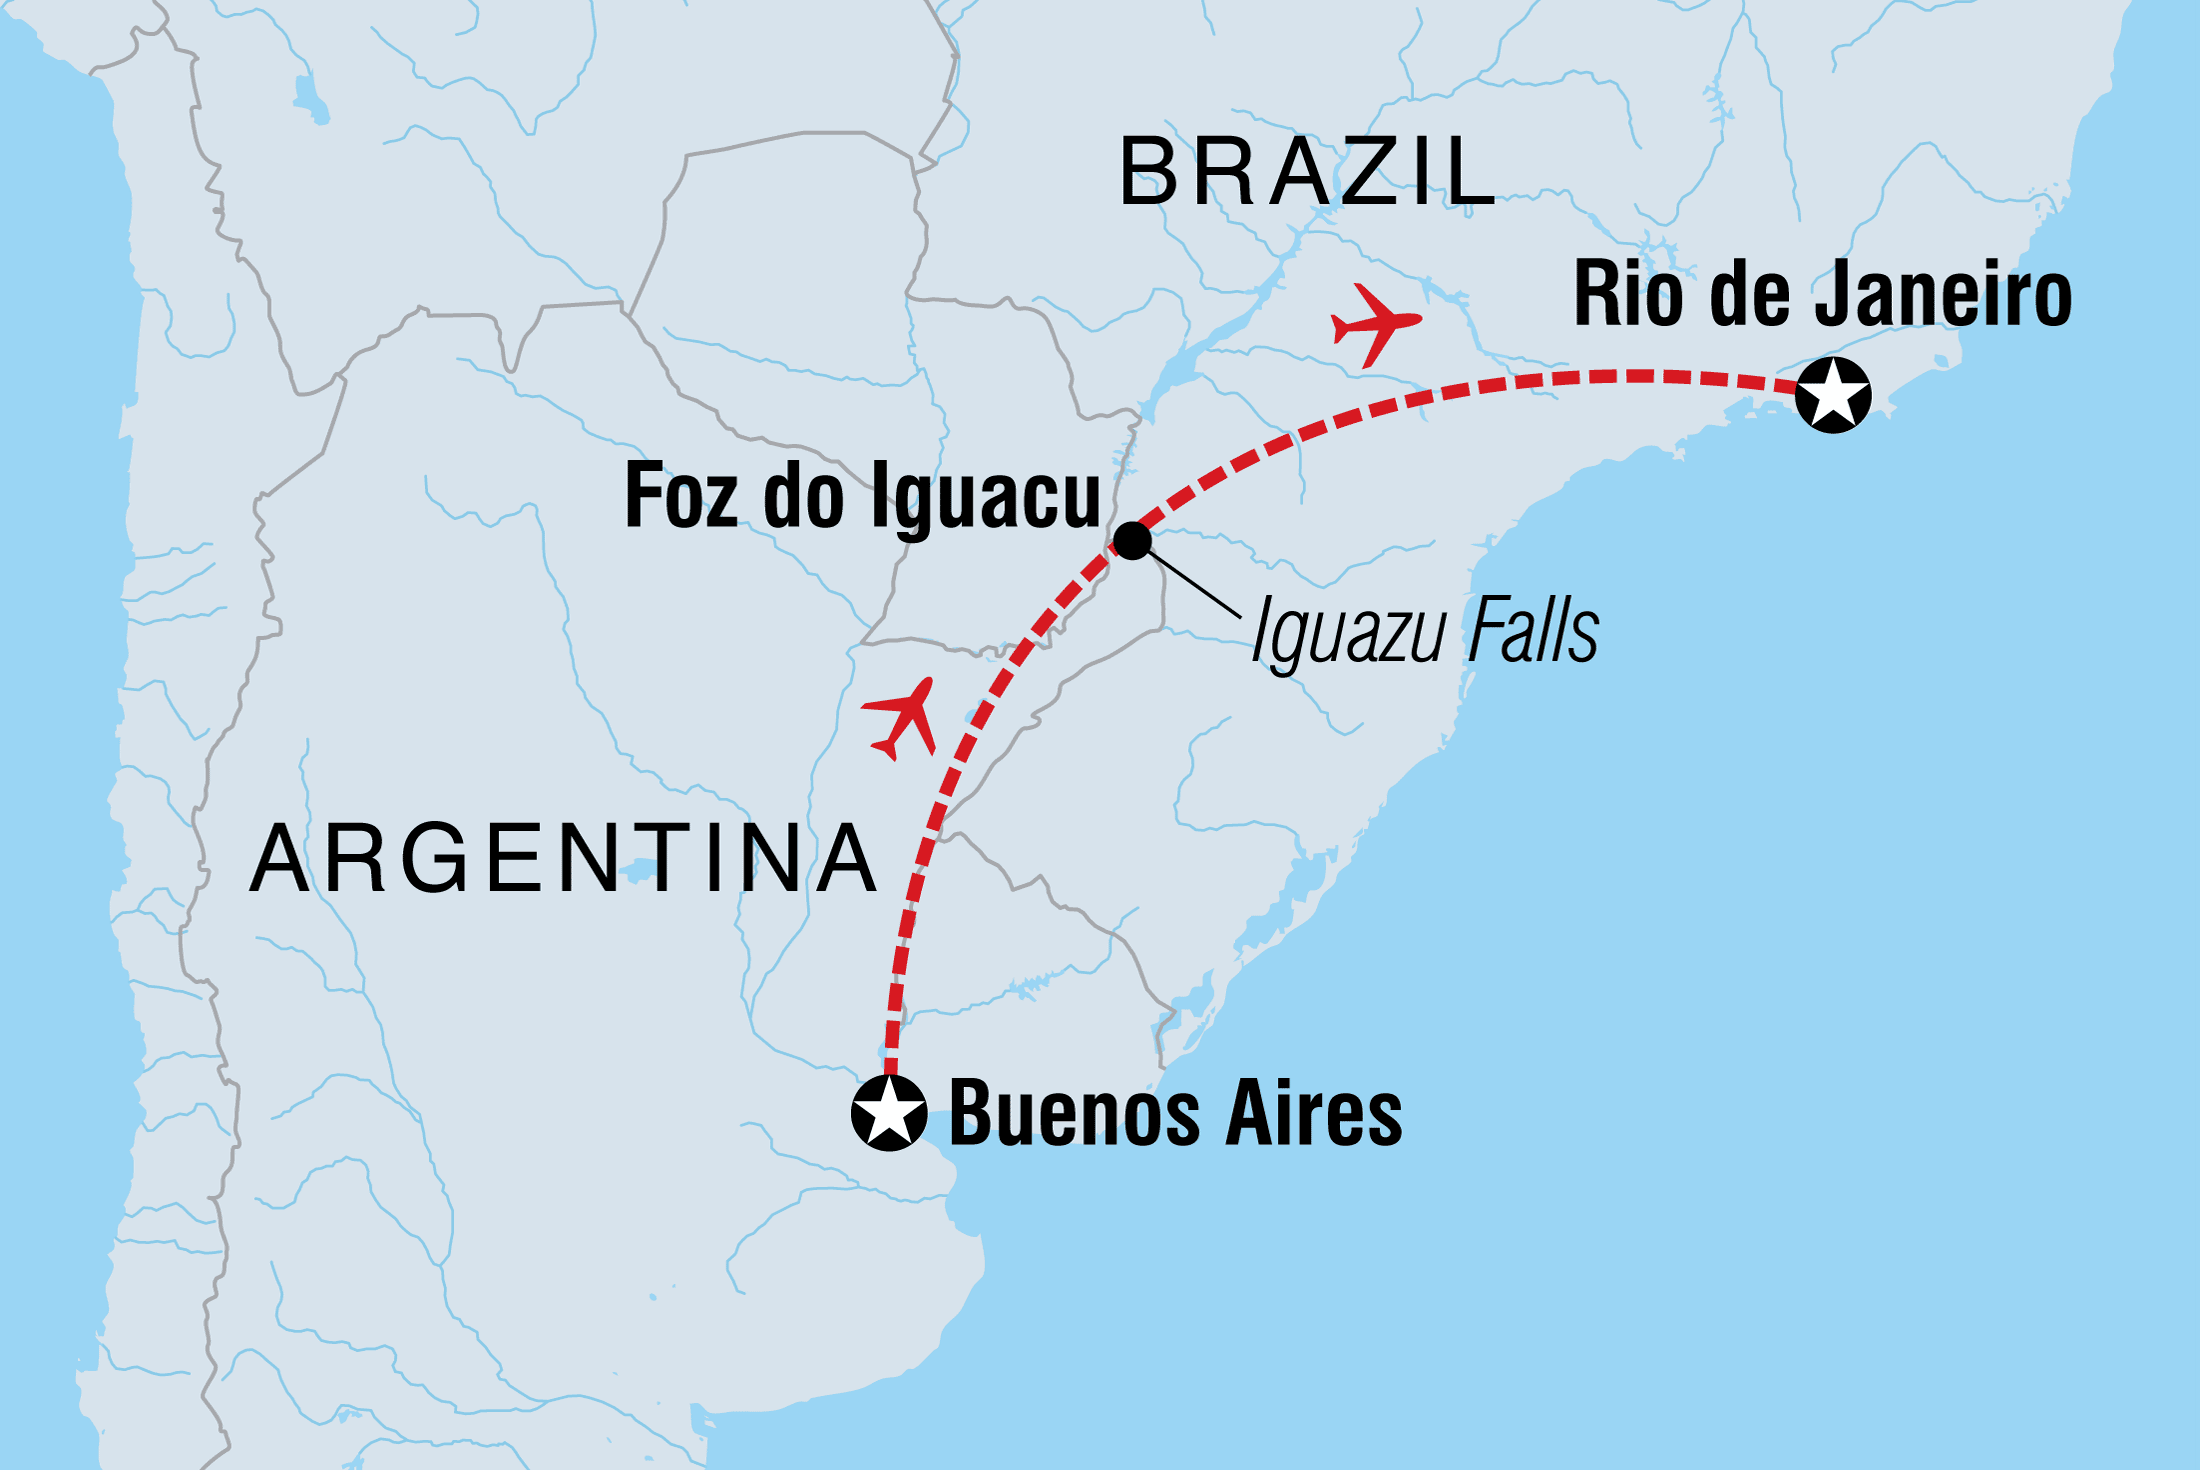 Map of Best Of Argentina & Brazil including Argentina and Brazil